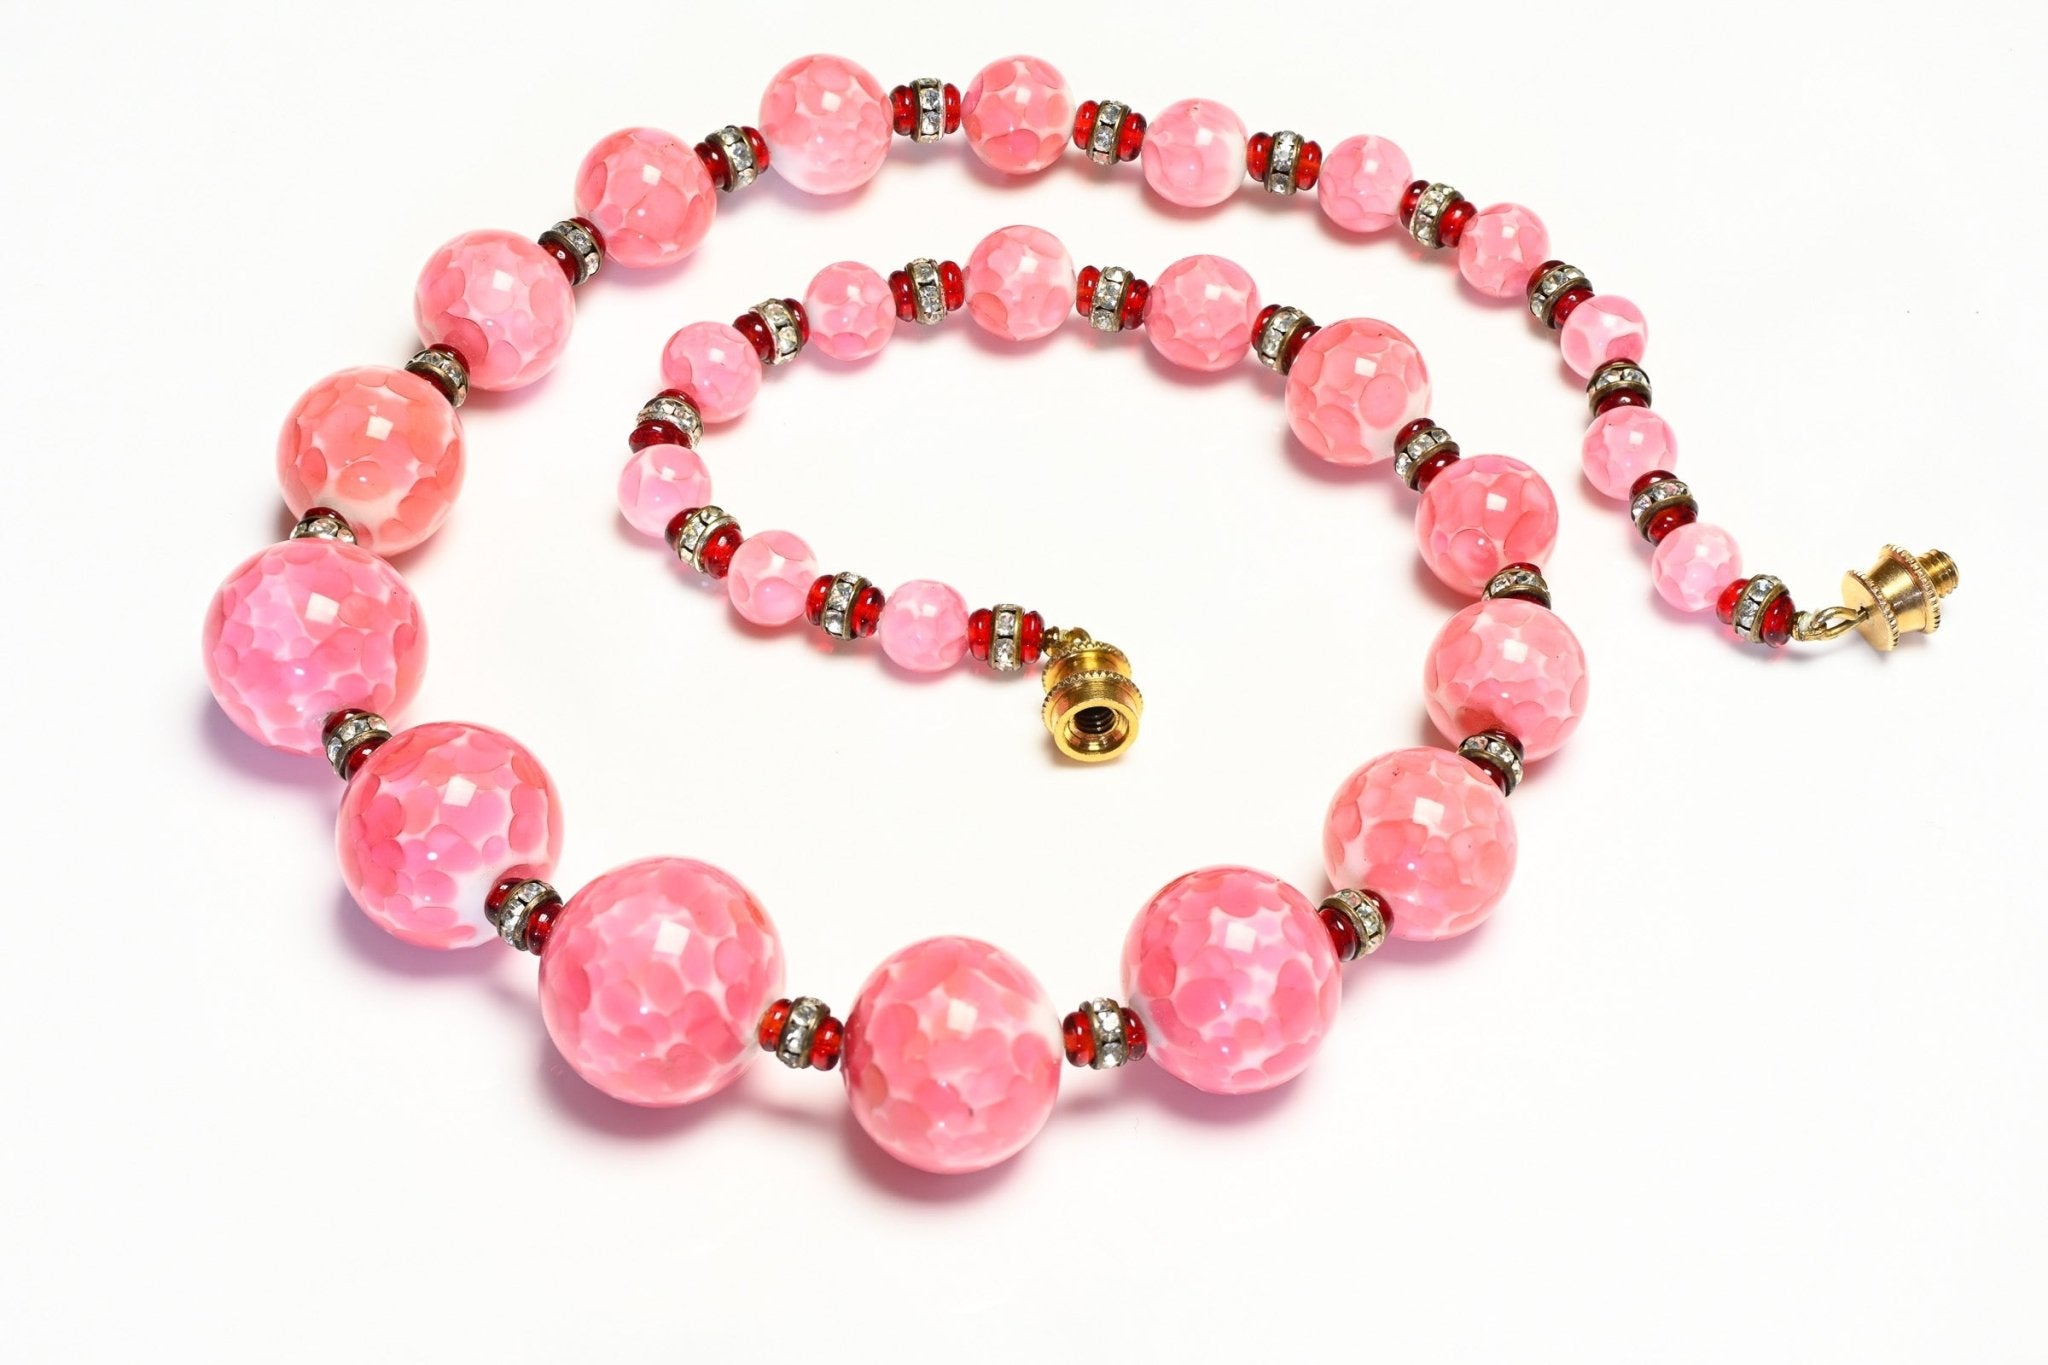 Vintage Louis Rousselet Paris Pink Red Marbled Glass Beads Collar Necklace